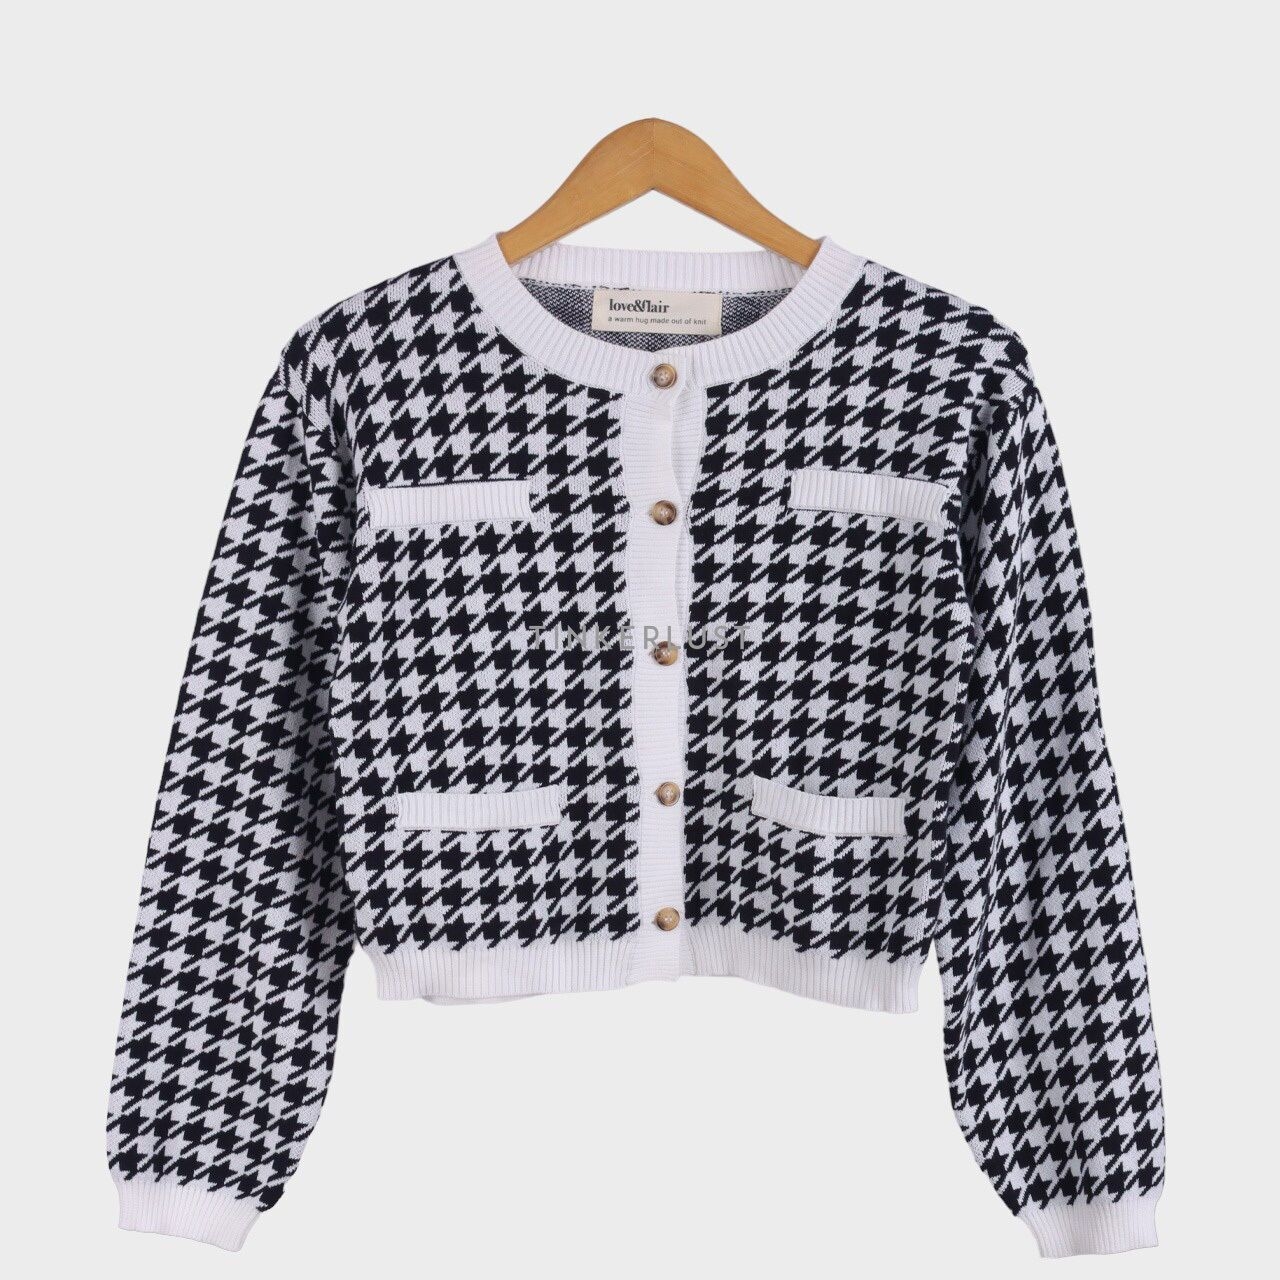 love-and-flair Black & White Houndstooth Cardigan